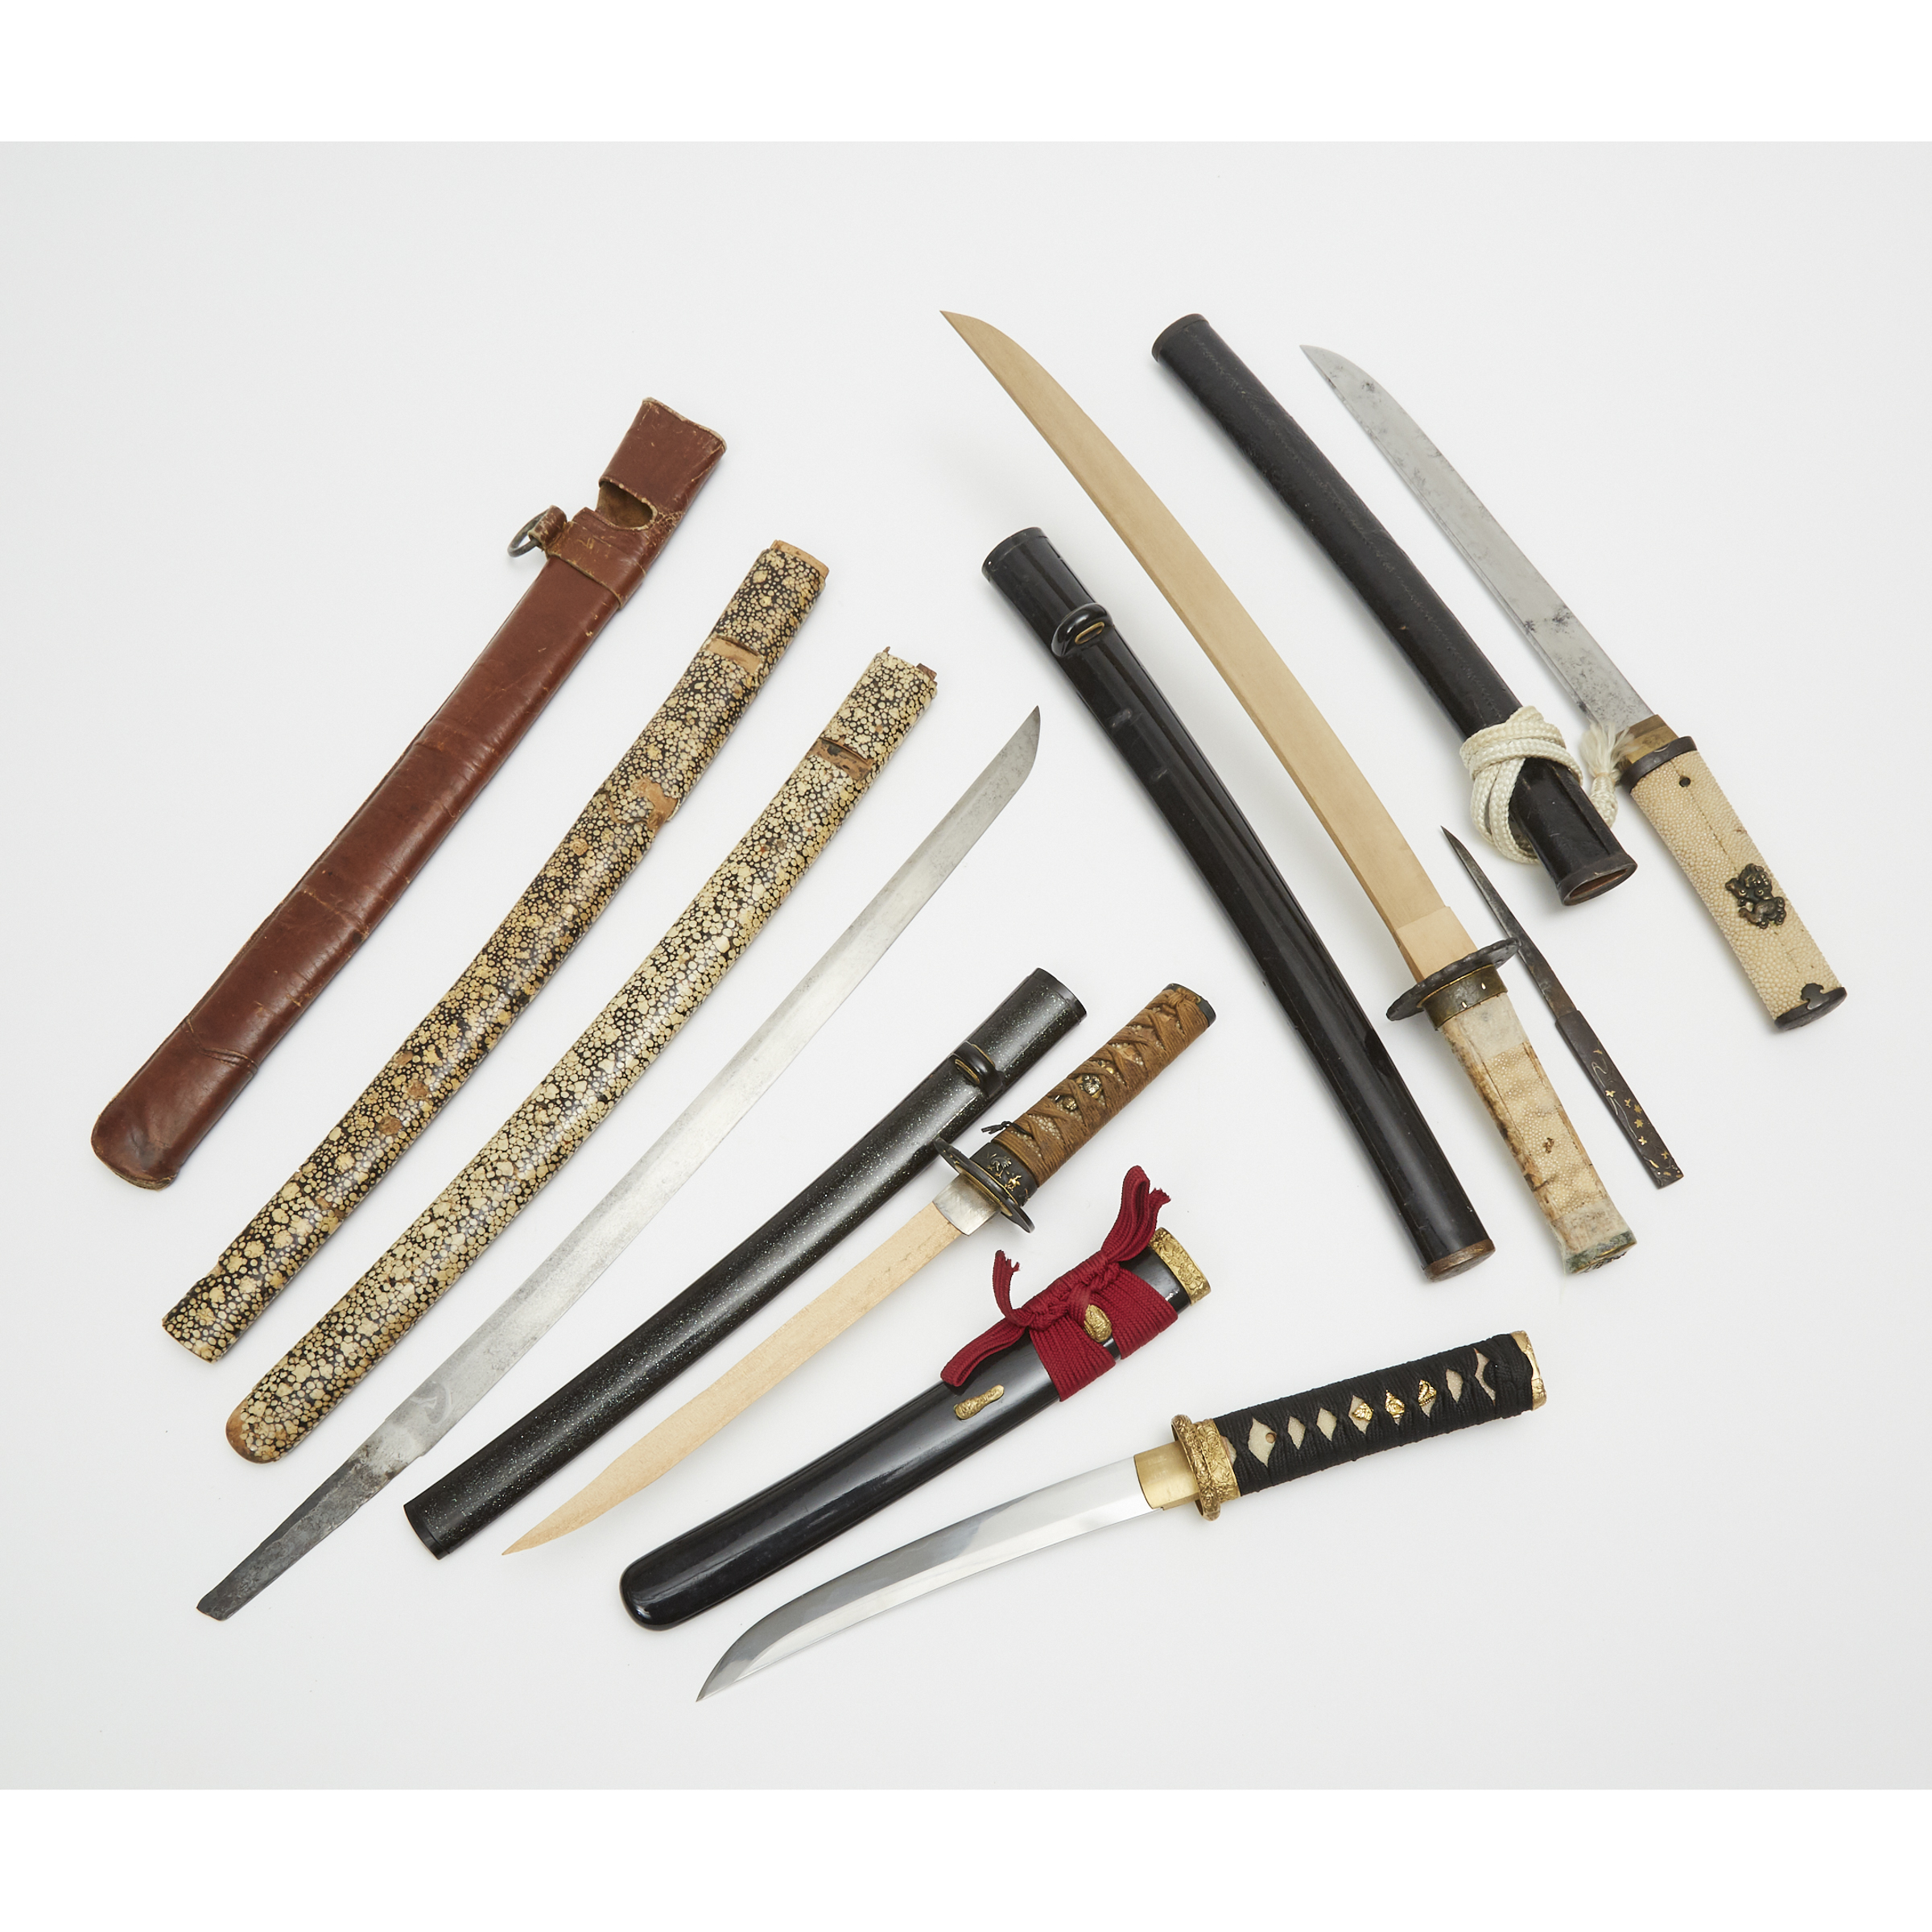 A Group of Eight Miscellaneous Japanese Sword Components